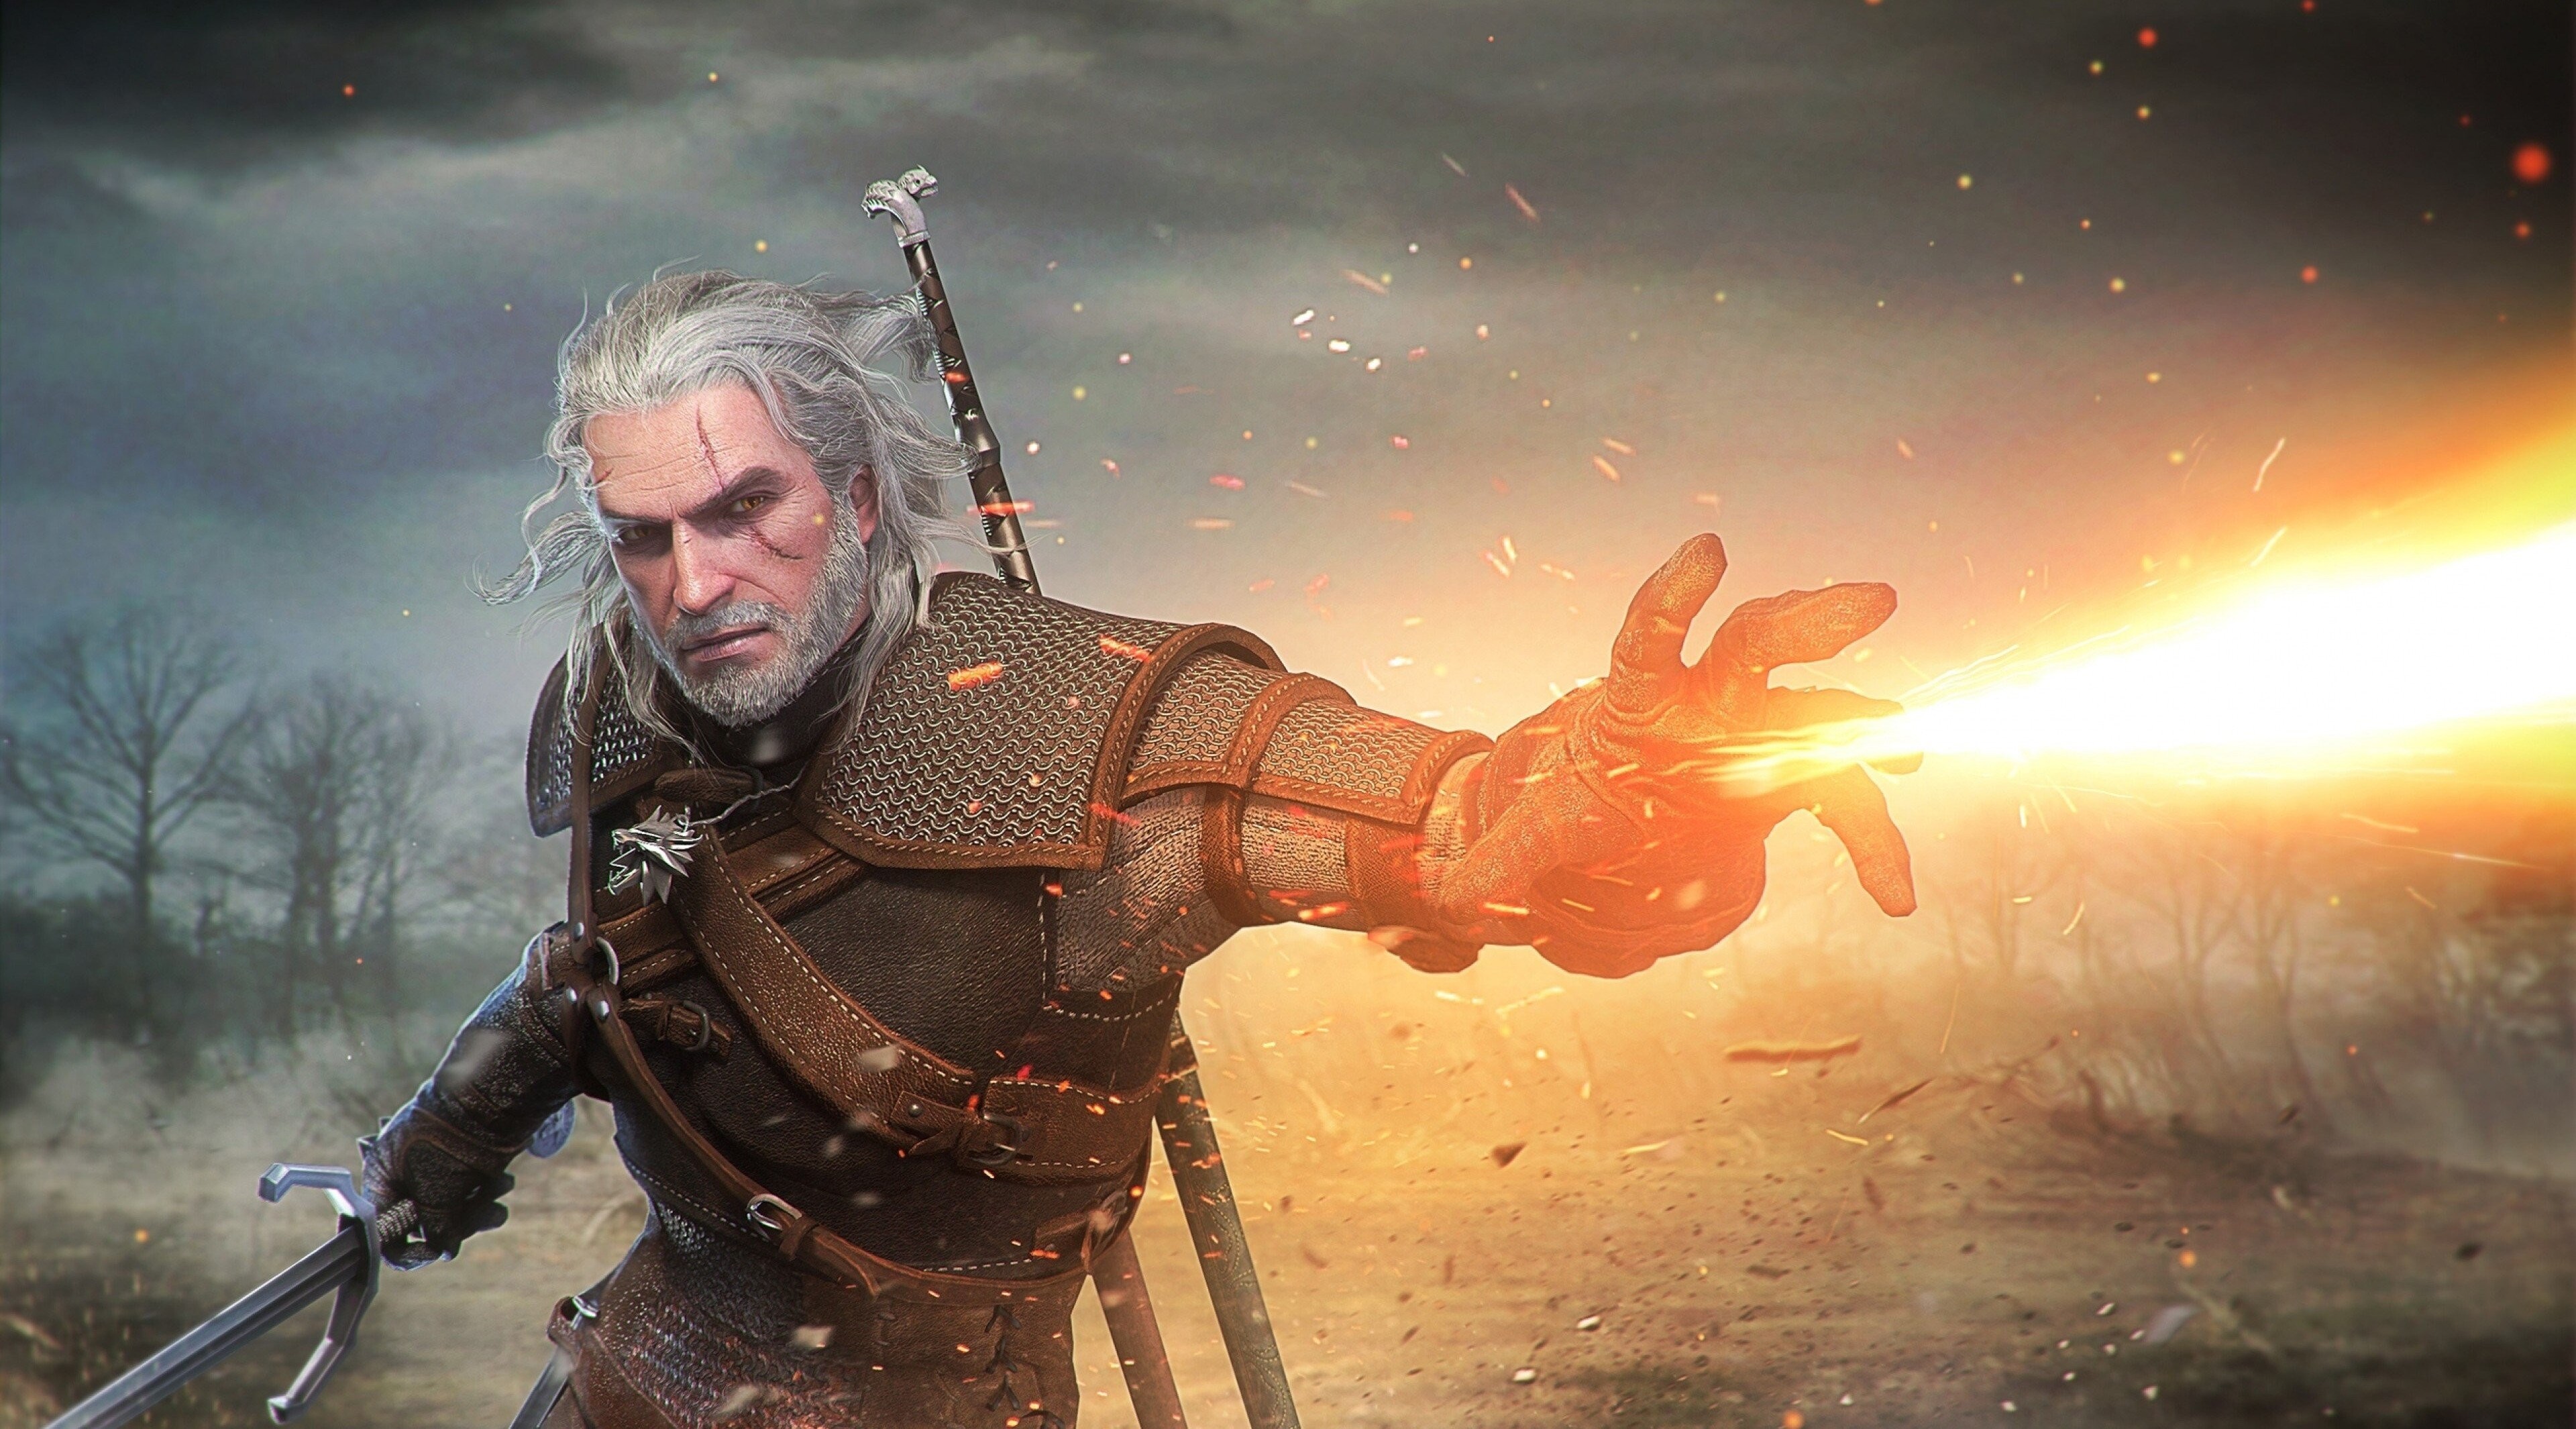 The witcher wild hunt k mac wallpaper p k k hd wallpapers backgrounds free download rare gallery